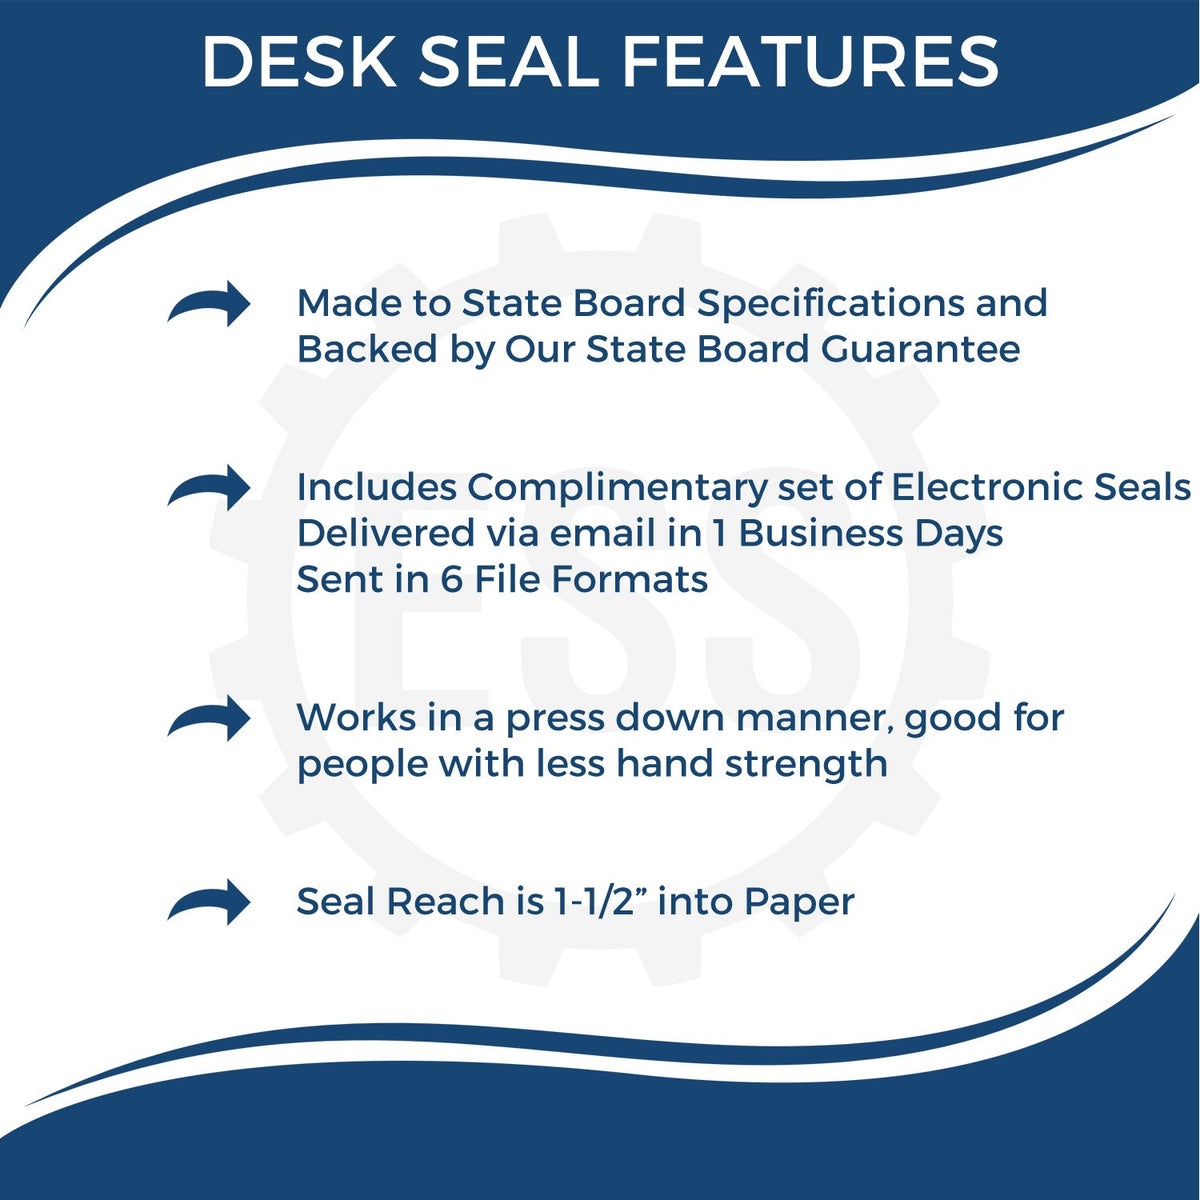 A picture of an infographic highlighting the selling points for the Virginia Engineer Desk Seal